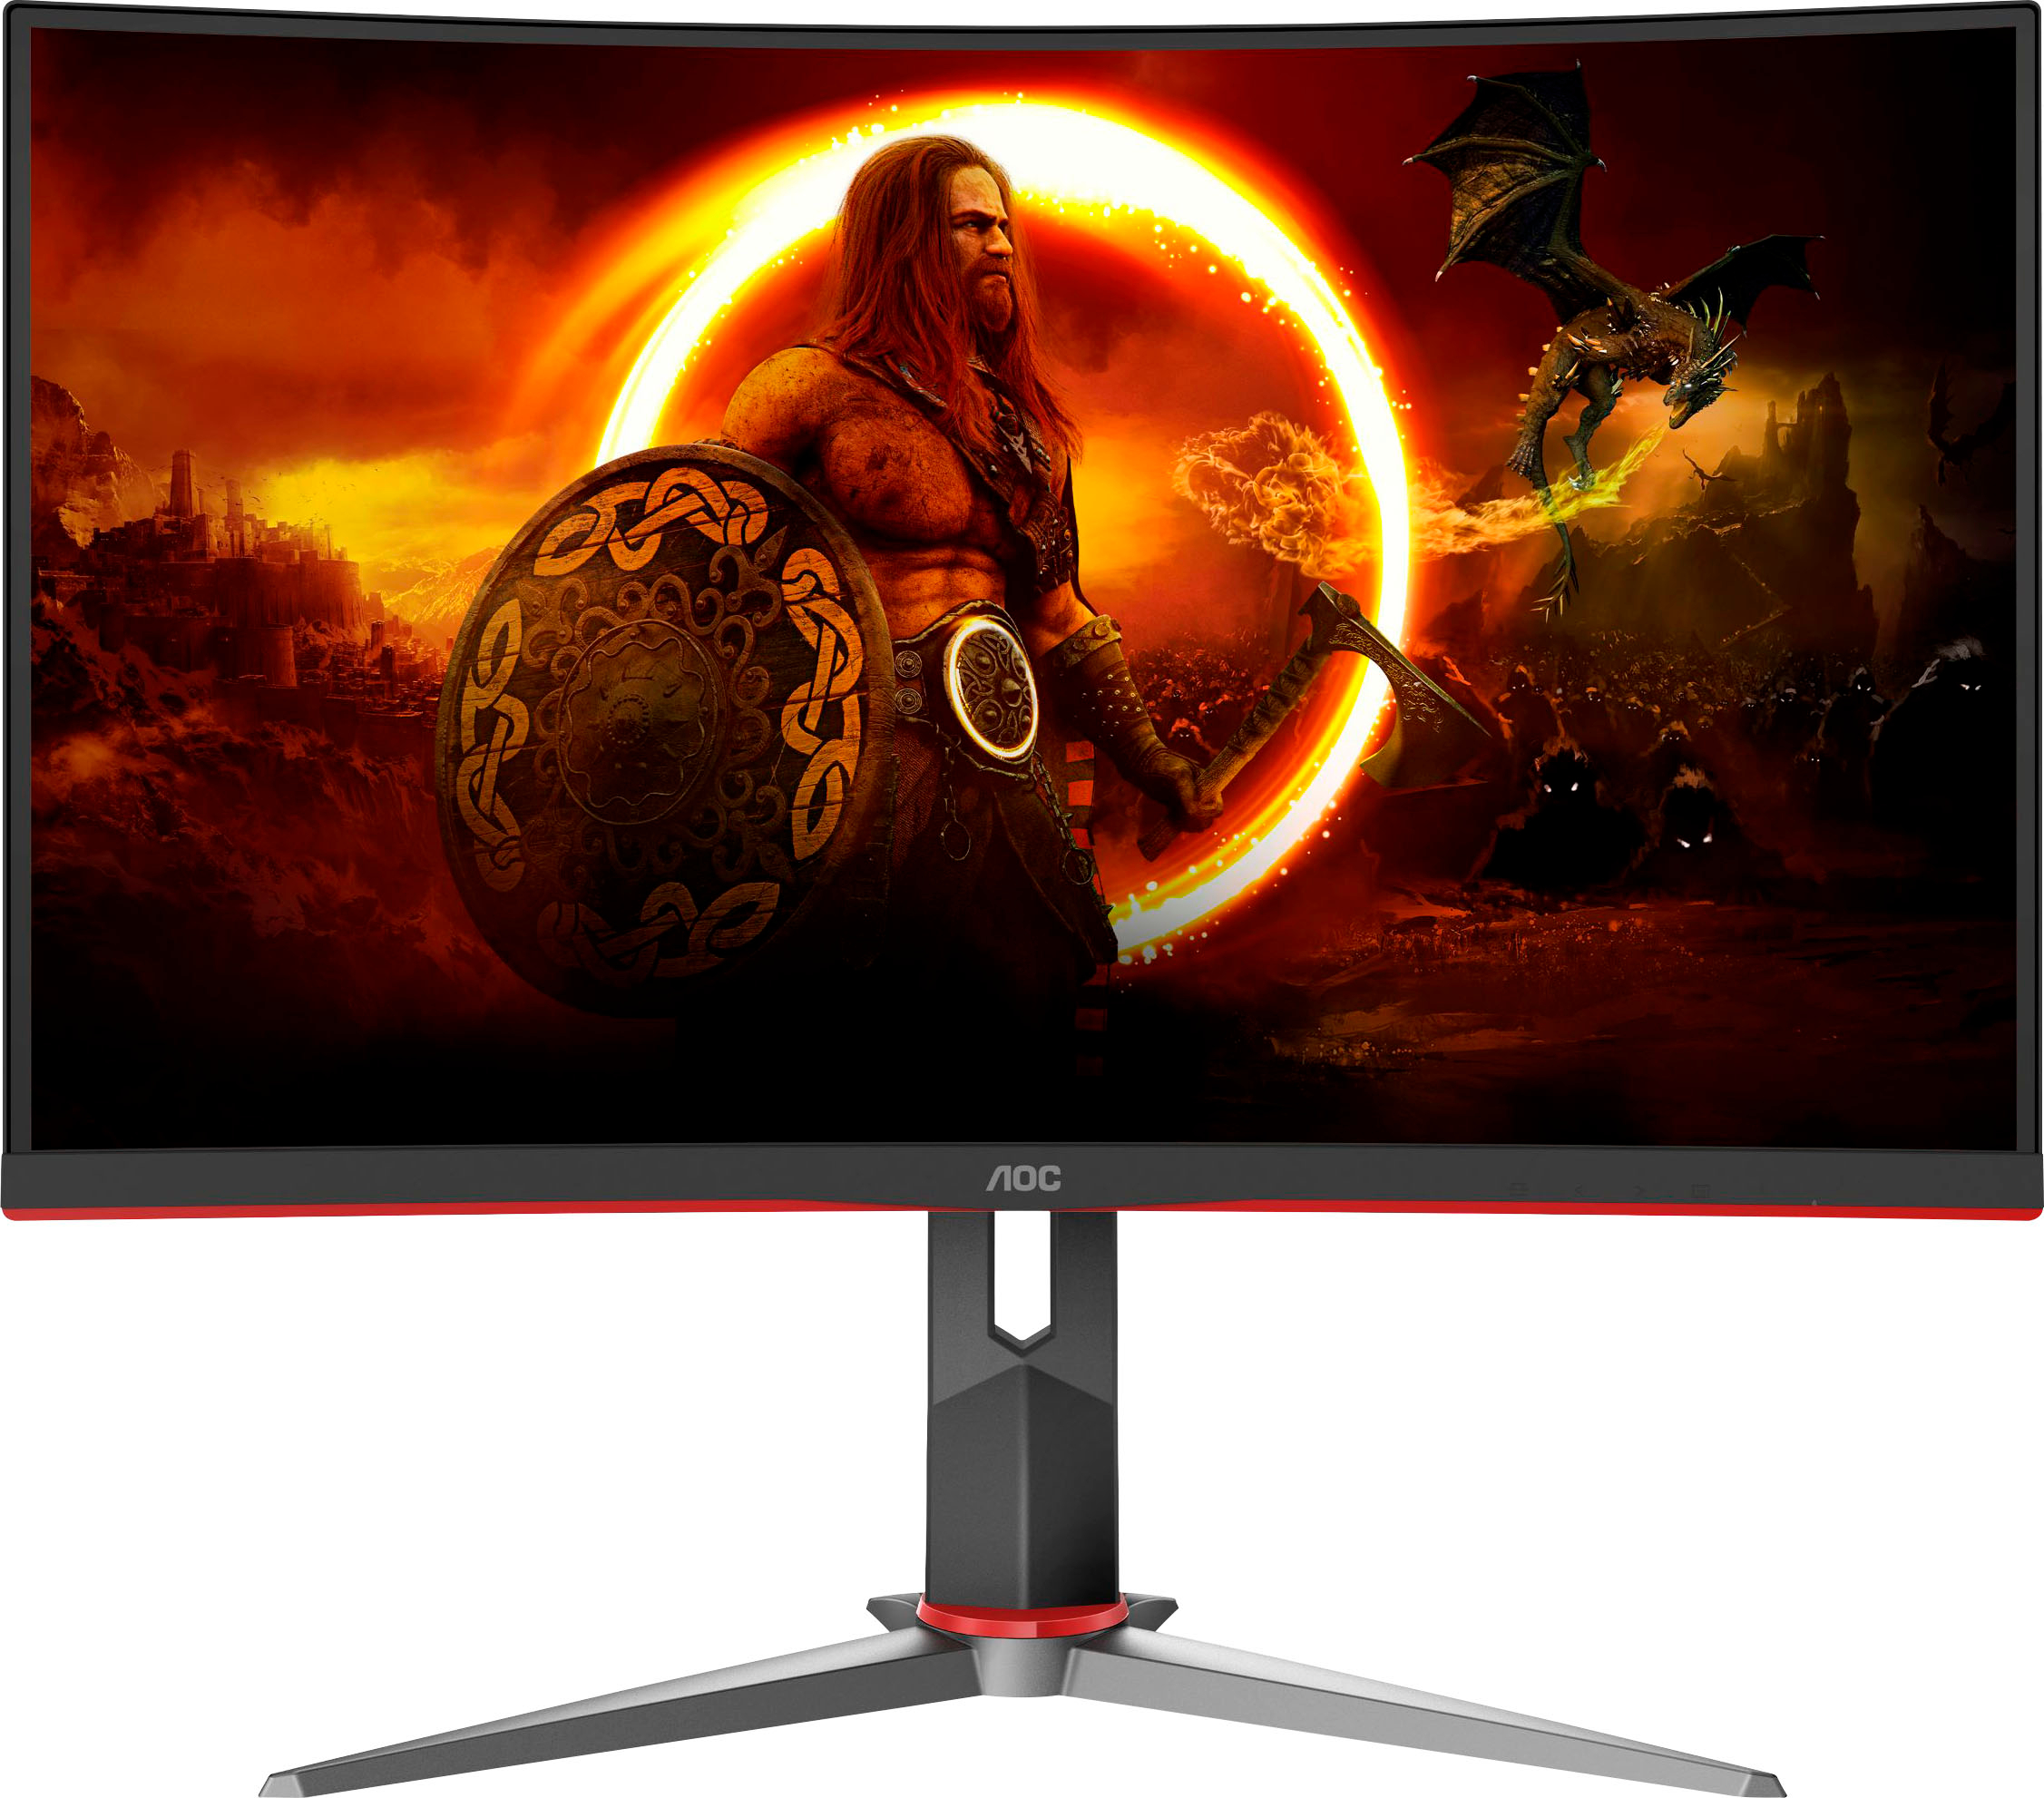 Angle View: AOC - G2 Series C27G2Z 27" LCD Curved FHD FreeSync Monitor - Black/Red